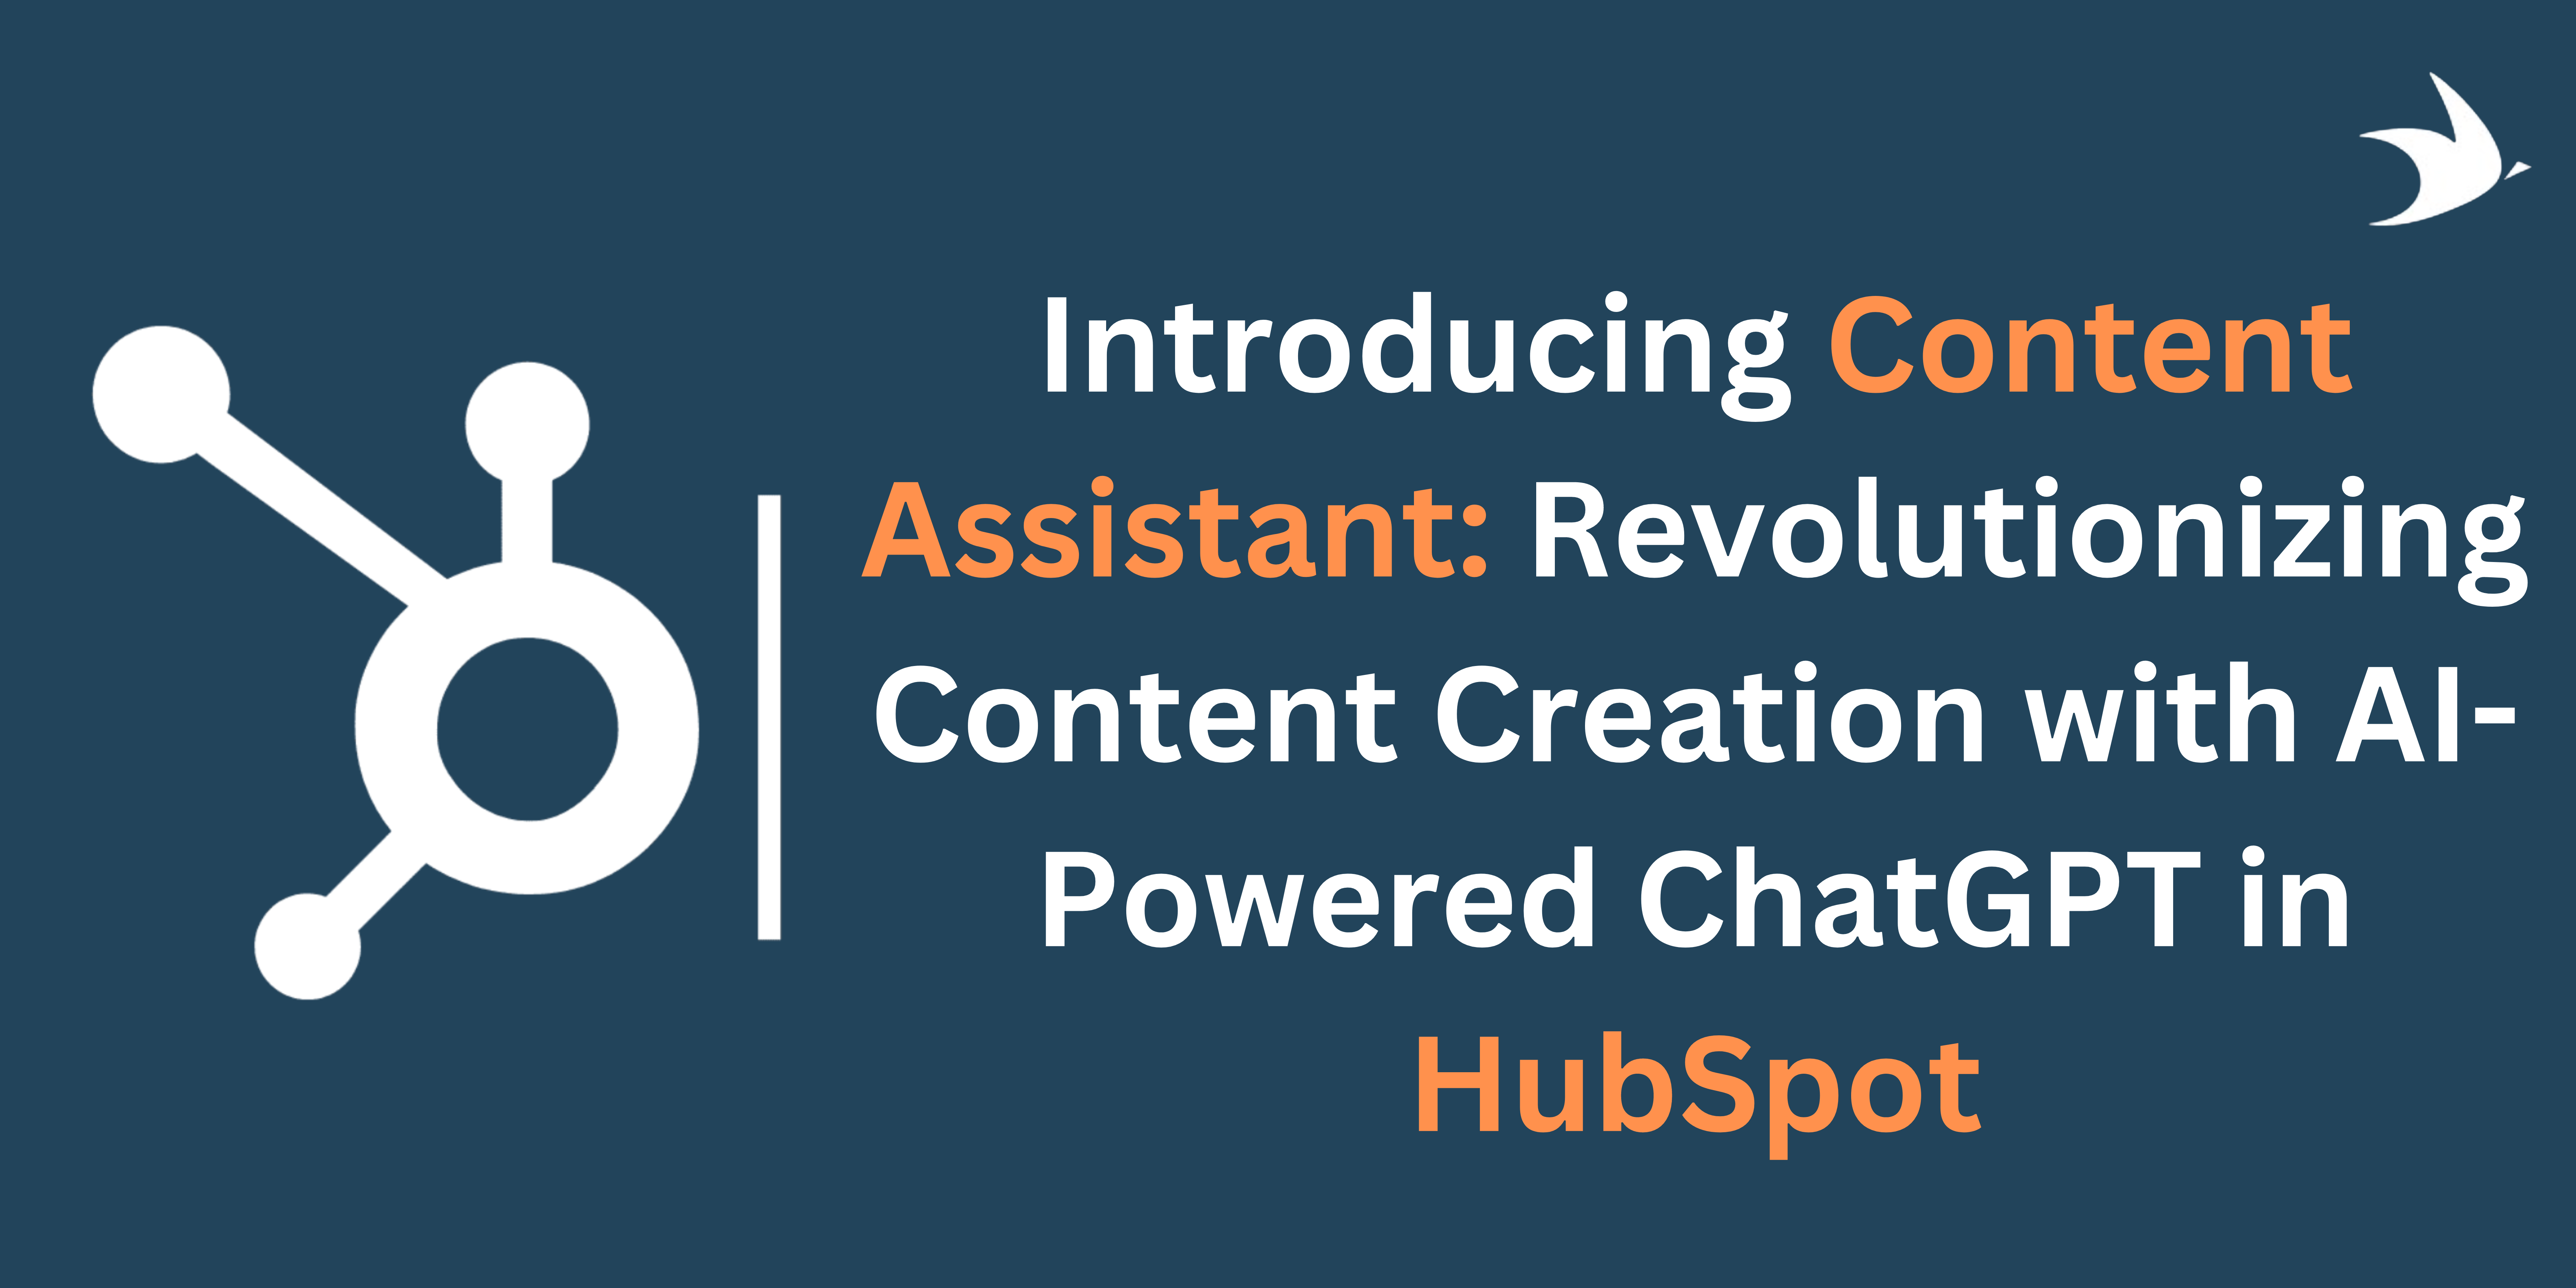 Introducing Content Assistant: Revolutionizing Content Creation with AI-Powered ChatGPT in HubSpot